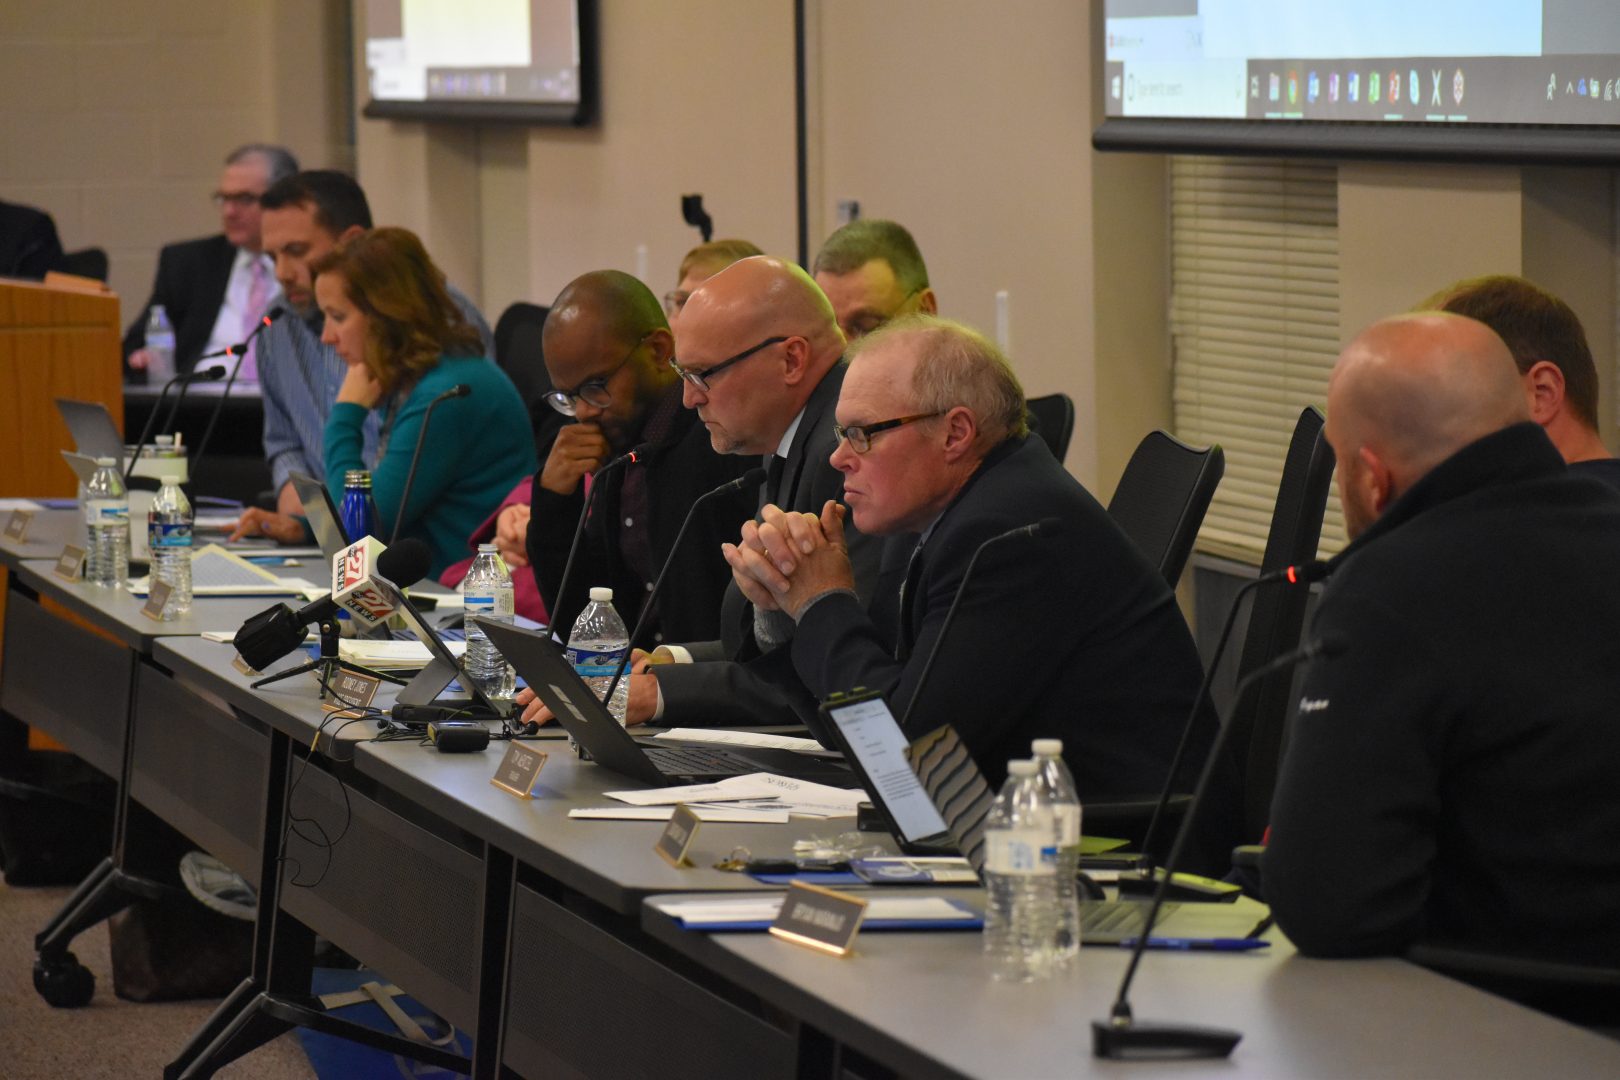 Members of the Eastern Lancaster County school board are seen  during a meeting on May 13, 2019.